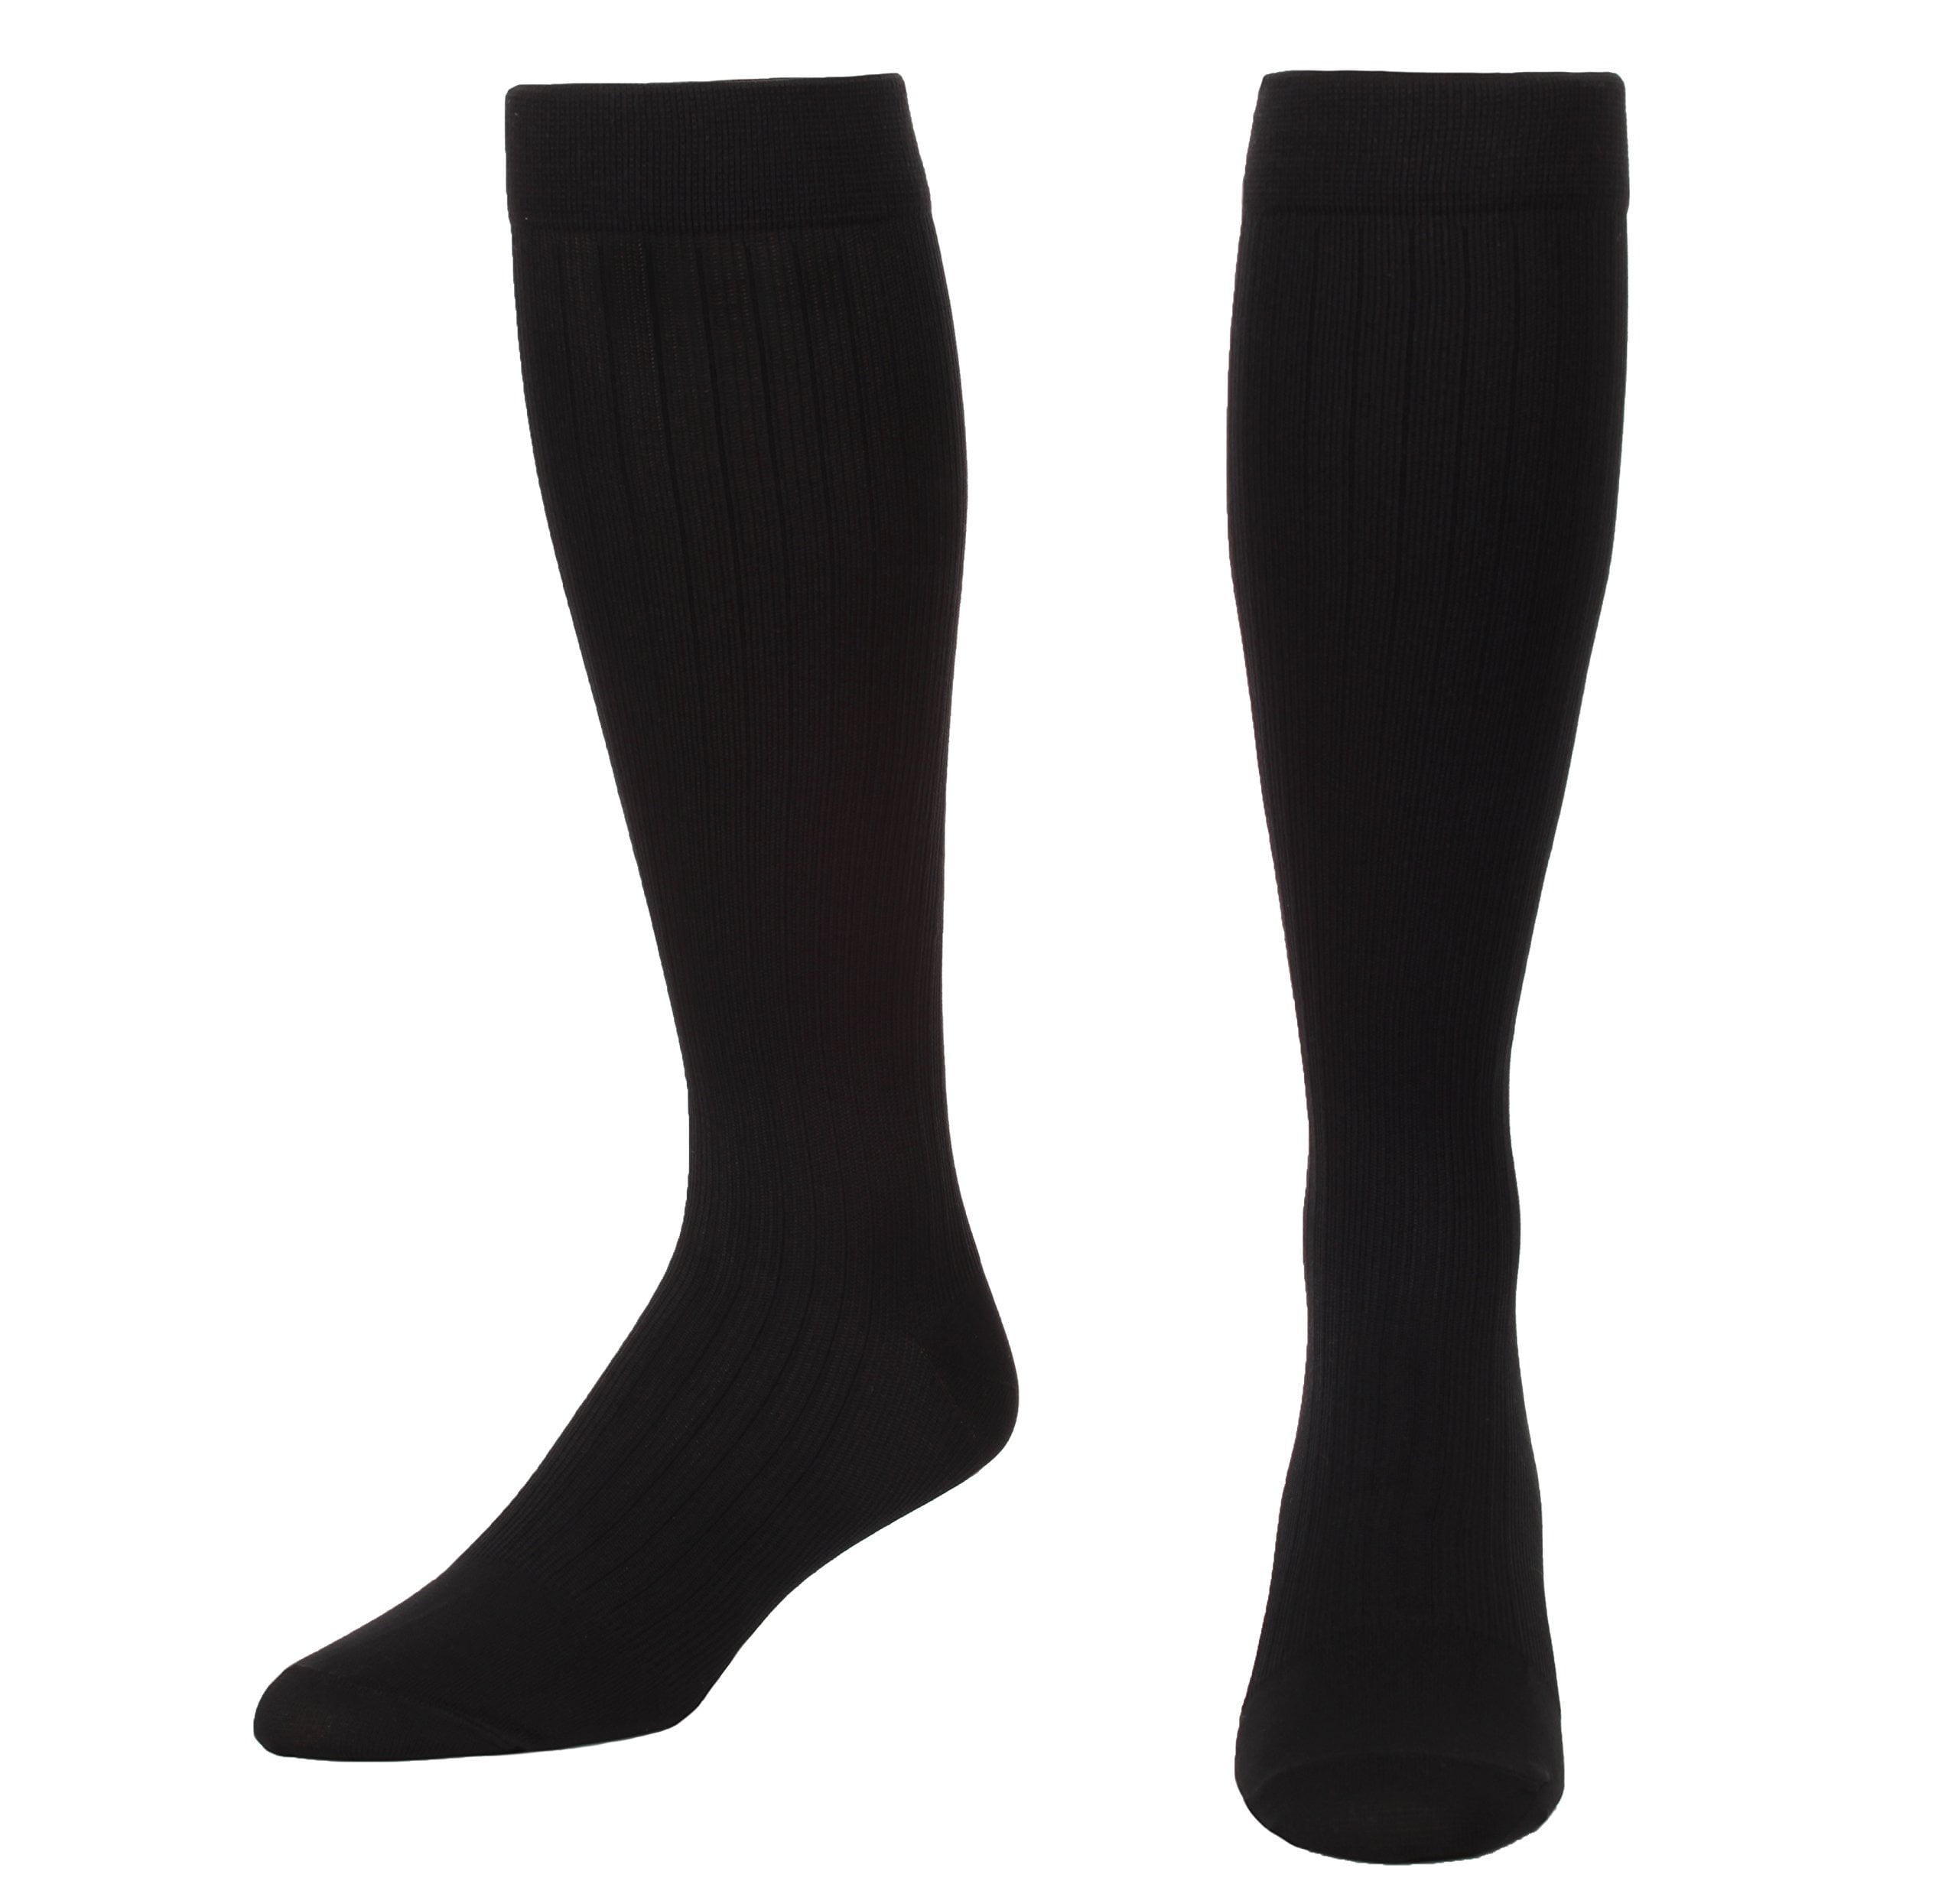 Microfiber and Cotton Compression Socks for men with - Dress Sock look ...